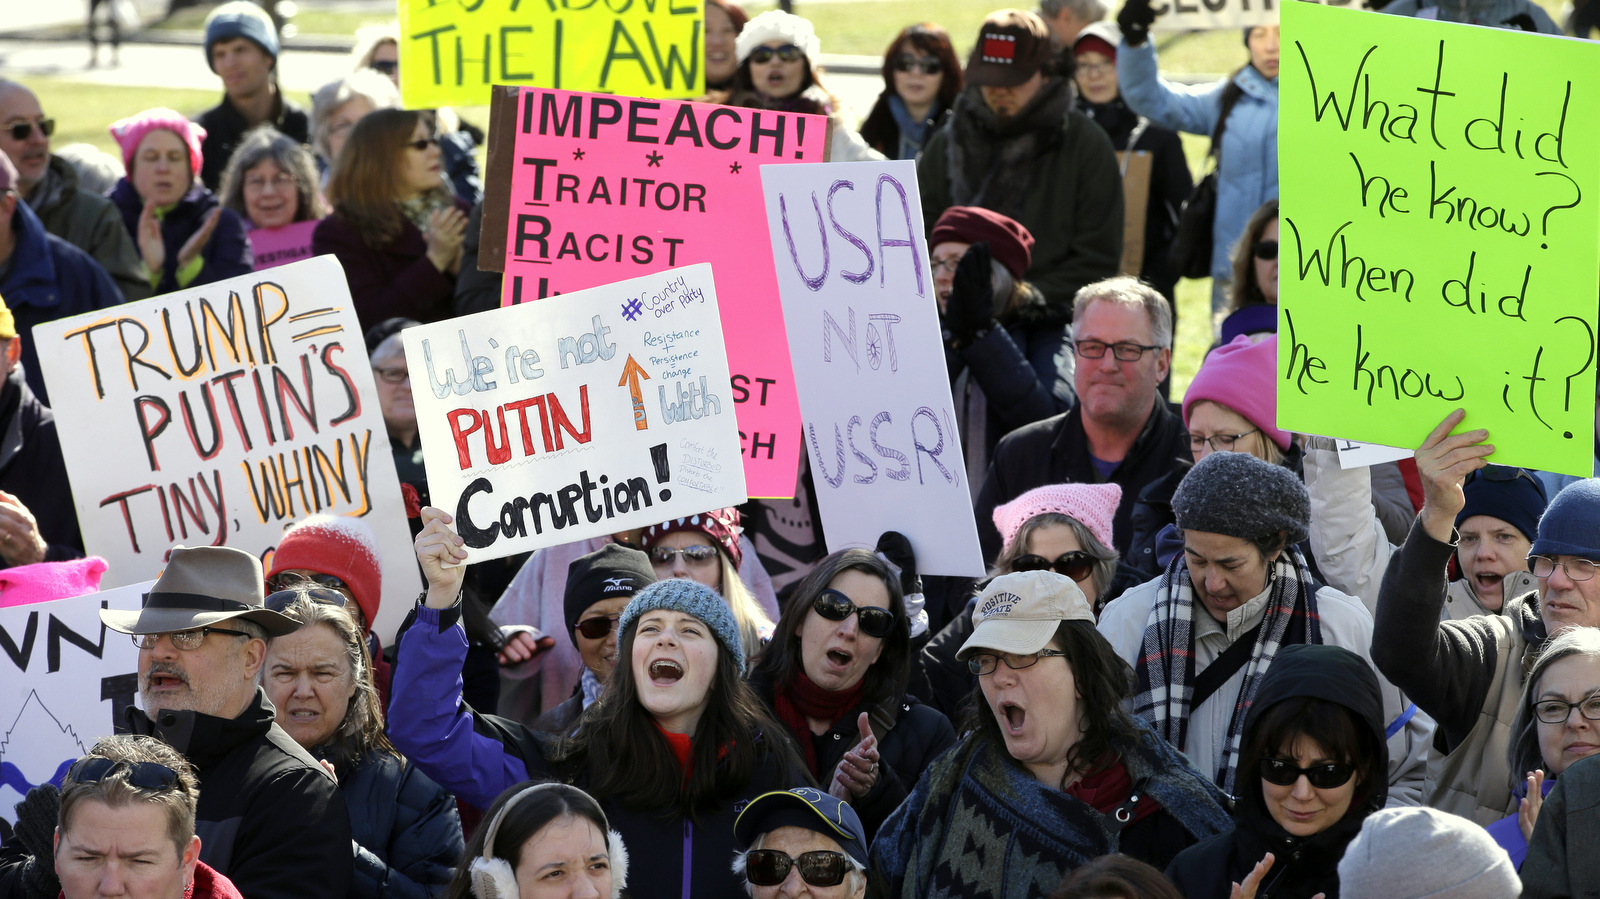 Protesters hold placards and chant slogans during a demonstration called "Emergency Rally to Stand for Democracy," Sunday, Feb. 26, 2017, in Boston. Demonstrators called for an investigation into what they describe as the possible involvement of Russian officials in the campaign of then presidential candidate Donald Trump in the Nov. 2016 electio